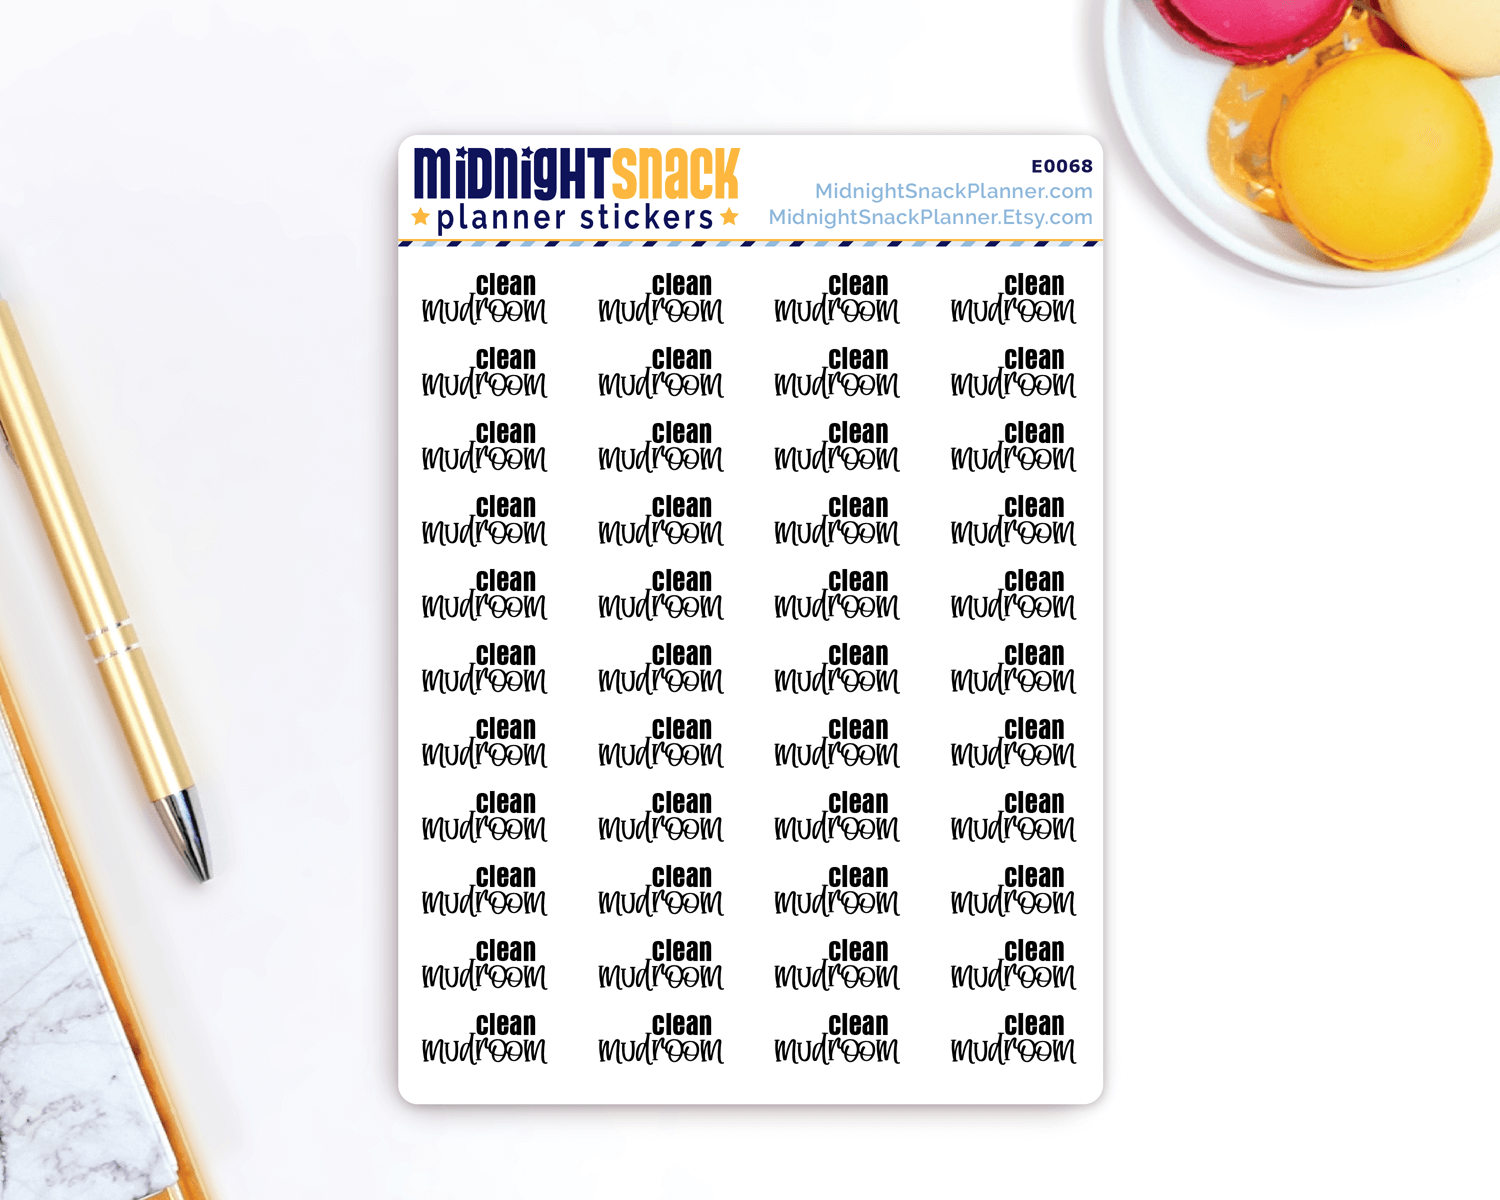 Clean Mudroom Script Planner Stickers: Household Chores Reminder